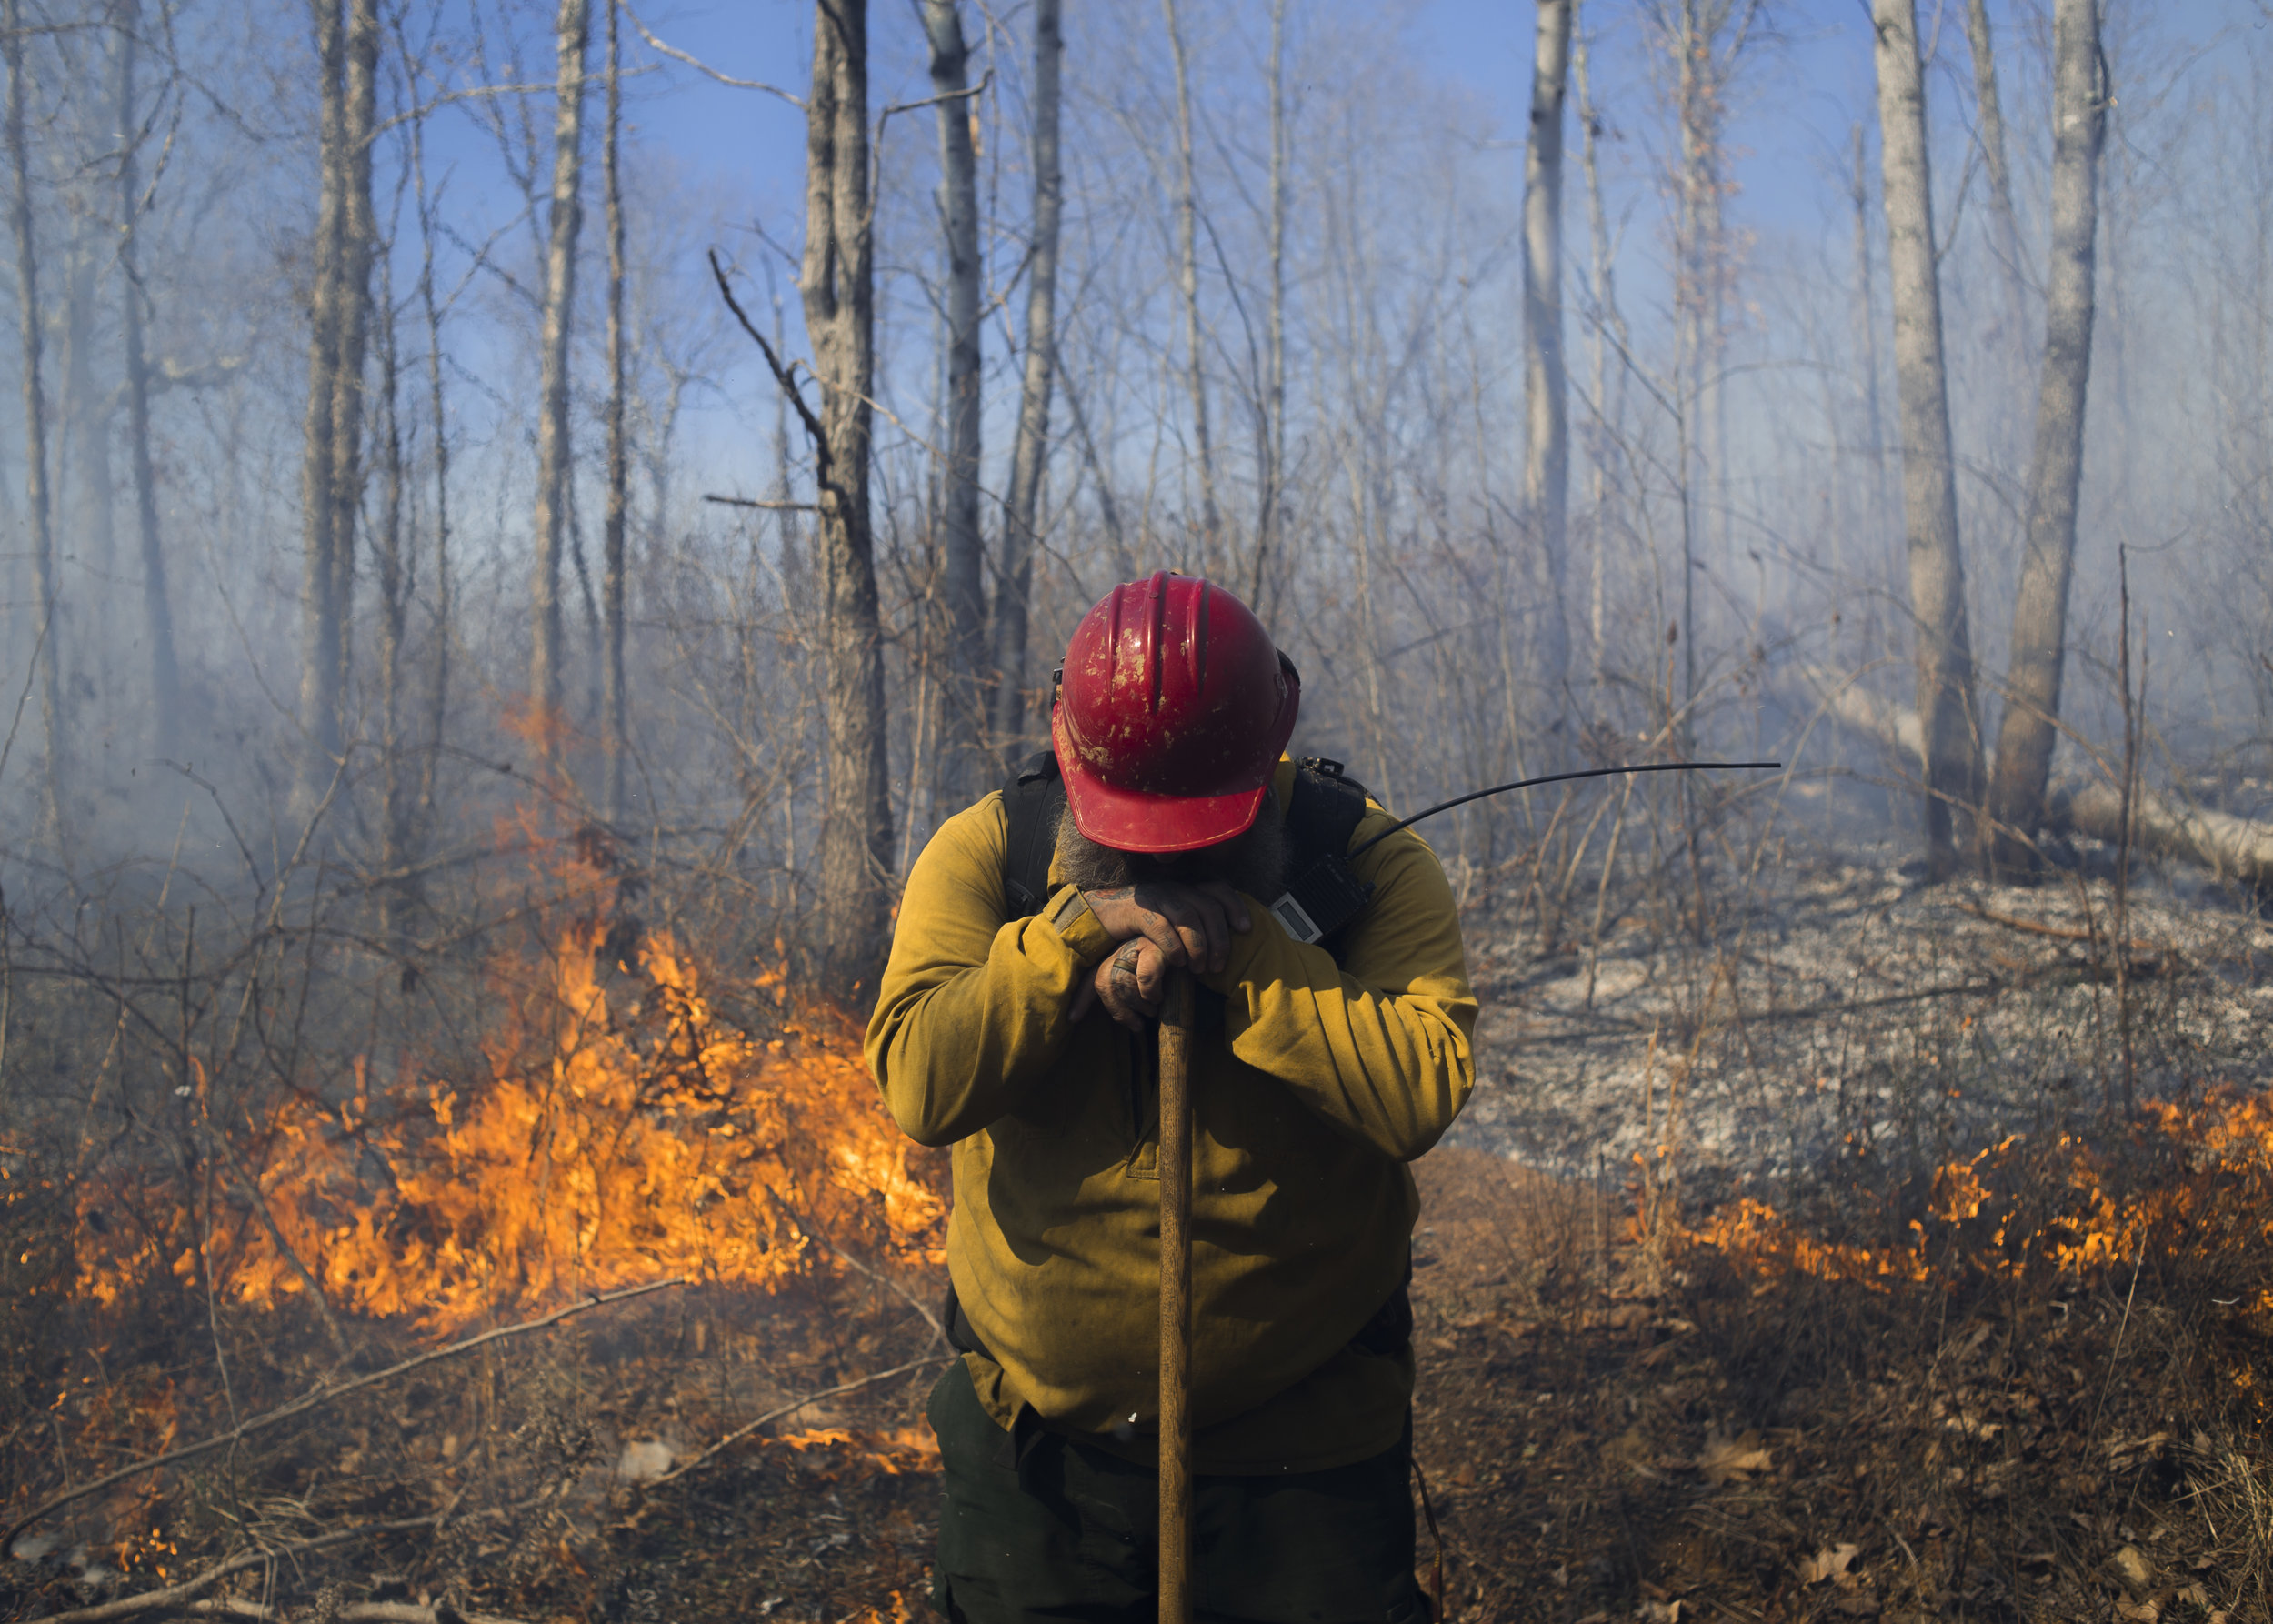  Jason Bew, the engine captain at the Wayne National Forest service, takes a momentary break late in the day of a prescribed burn on Friday, March 17, 2017.  